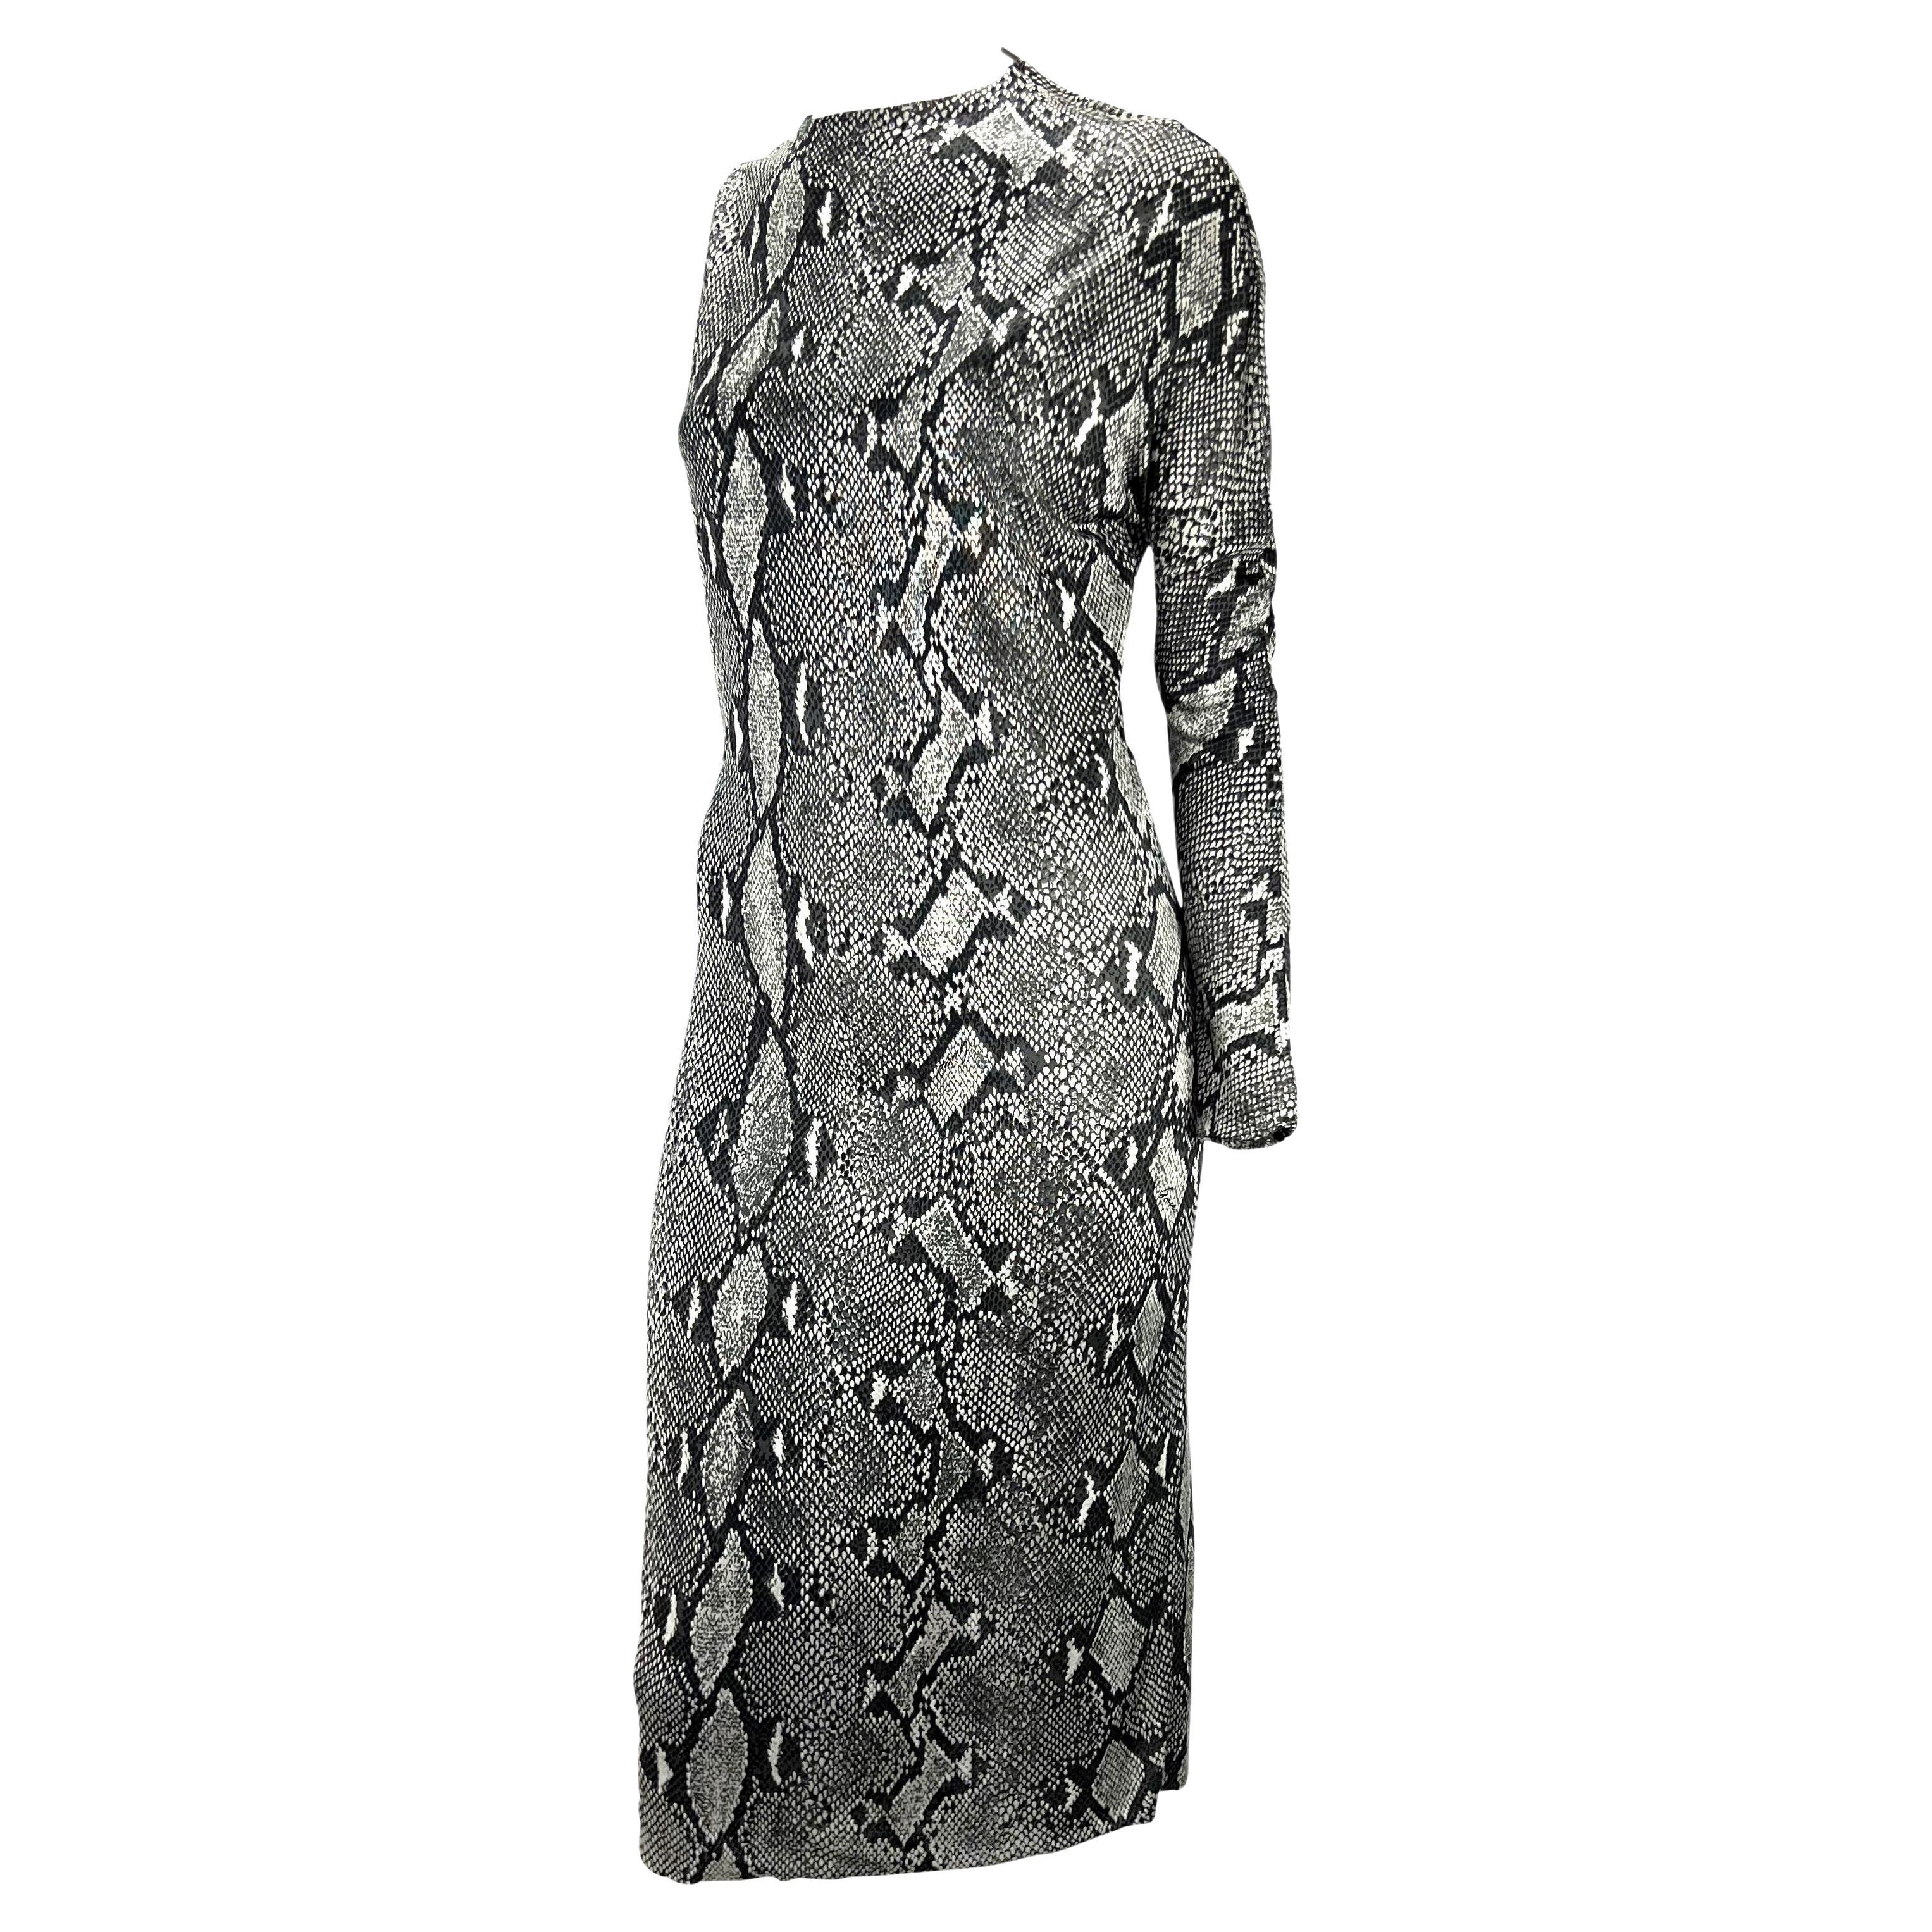 S/S 2000 Gucci by Tom Ford Grey Snake Print Asymmetric One Sleeve Dress In Good Condition For Sale In West Hollywood, CA